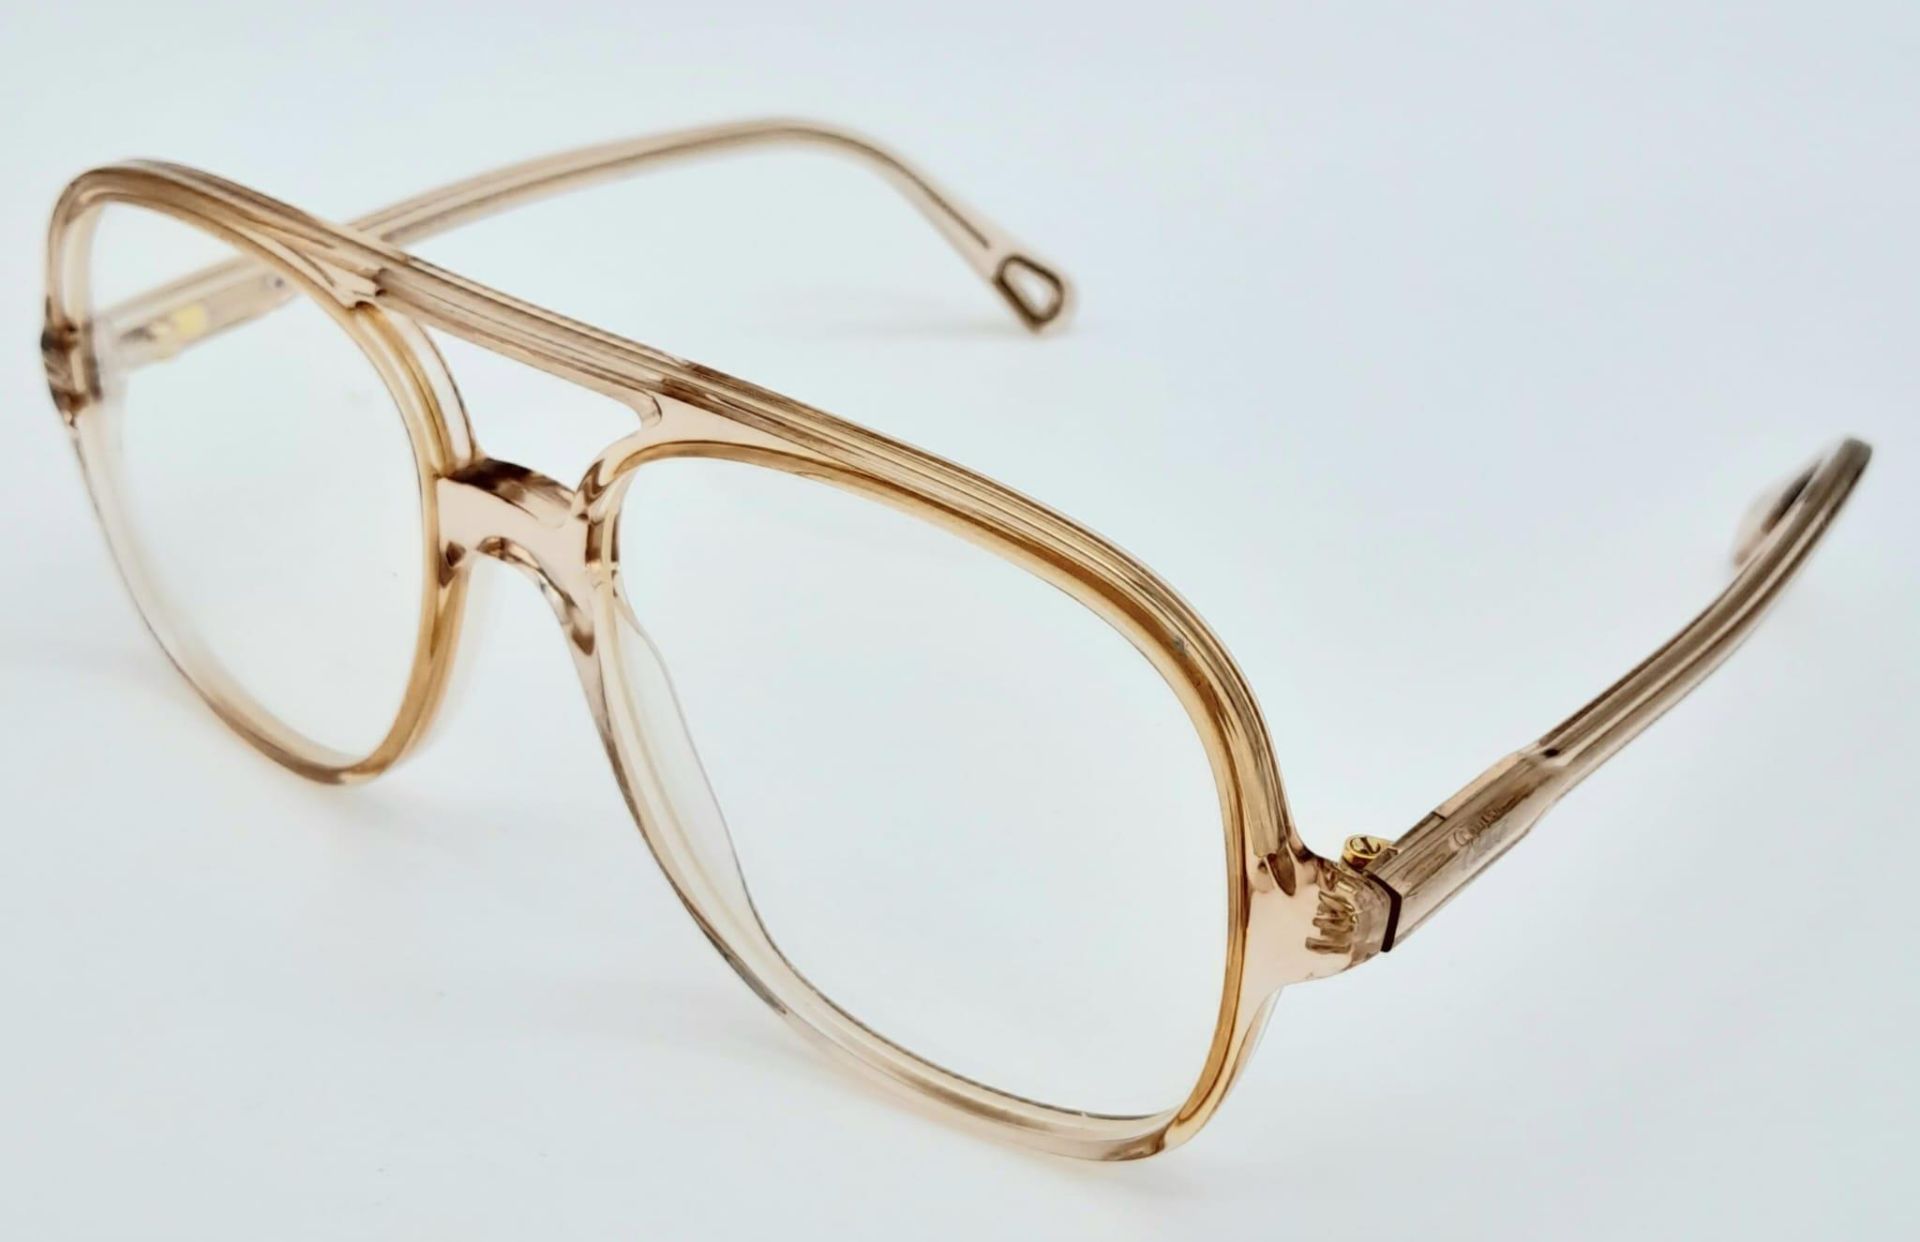 Chloe 'Patty' Eyeglasses. Large navigator shape/style and nude colour, Patty brings a 70s-inspired - Bild 5 aus 11